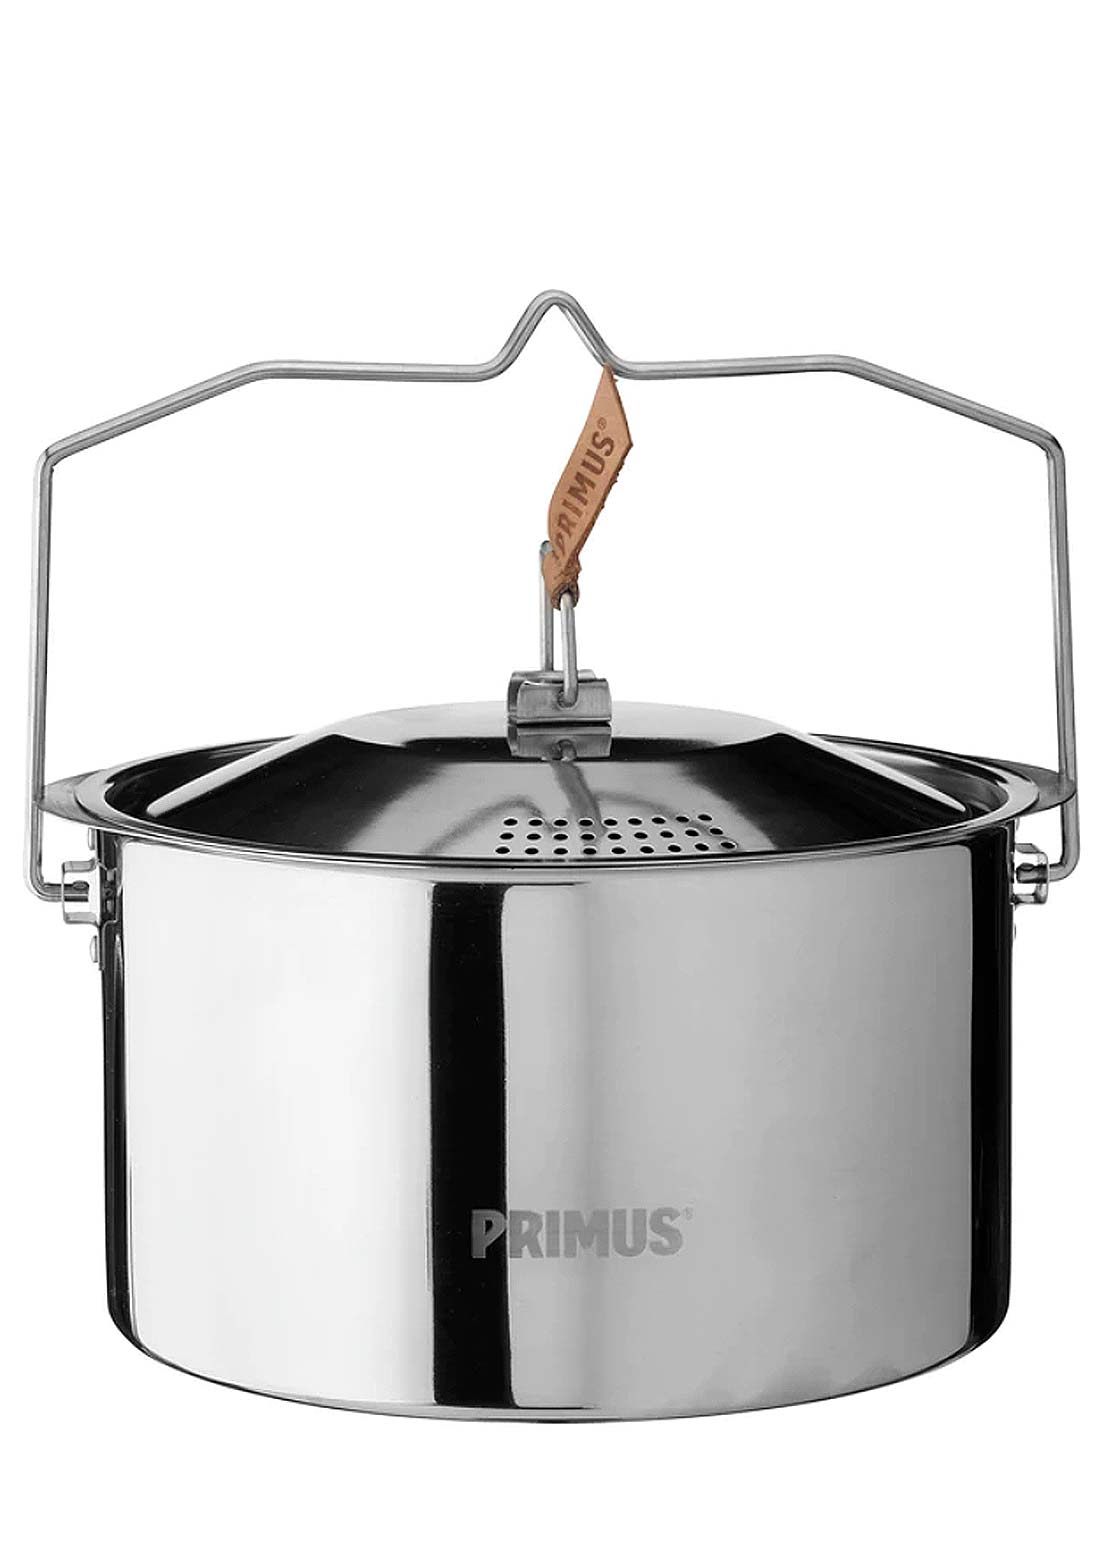 Primus Large Campfire Cookset Stainless Steel